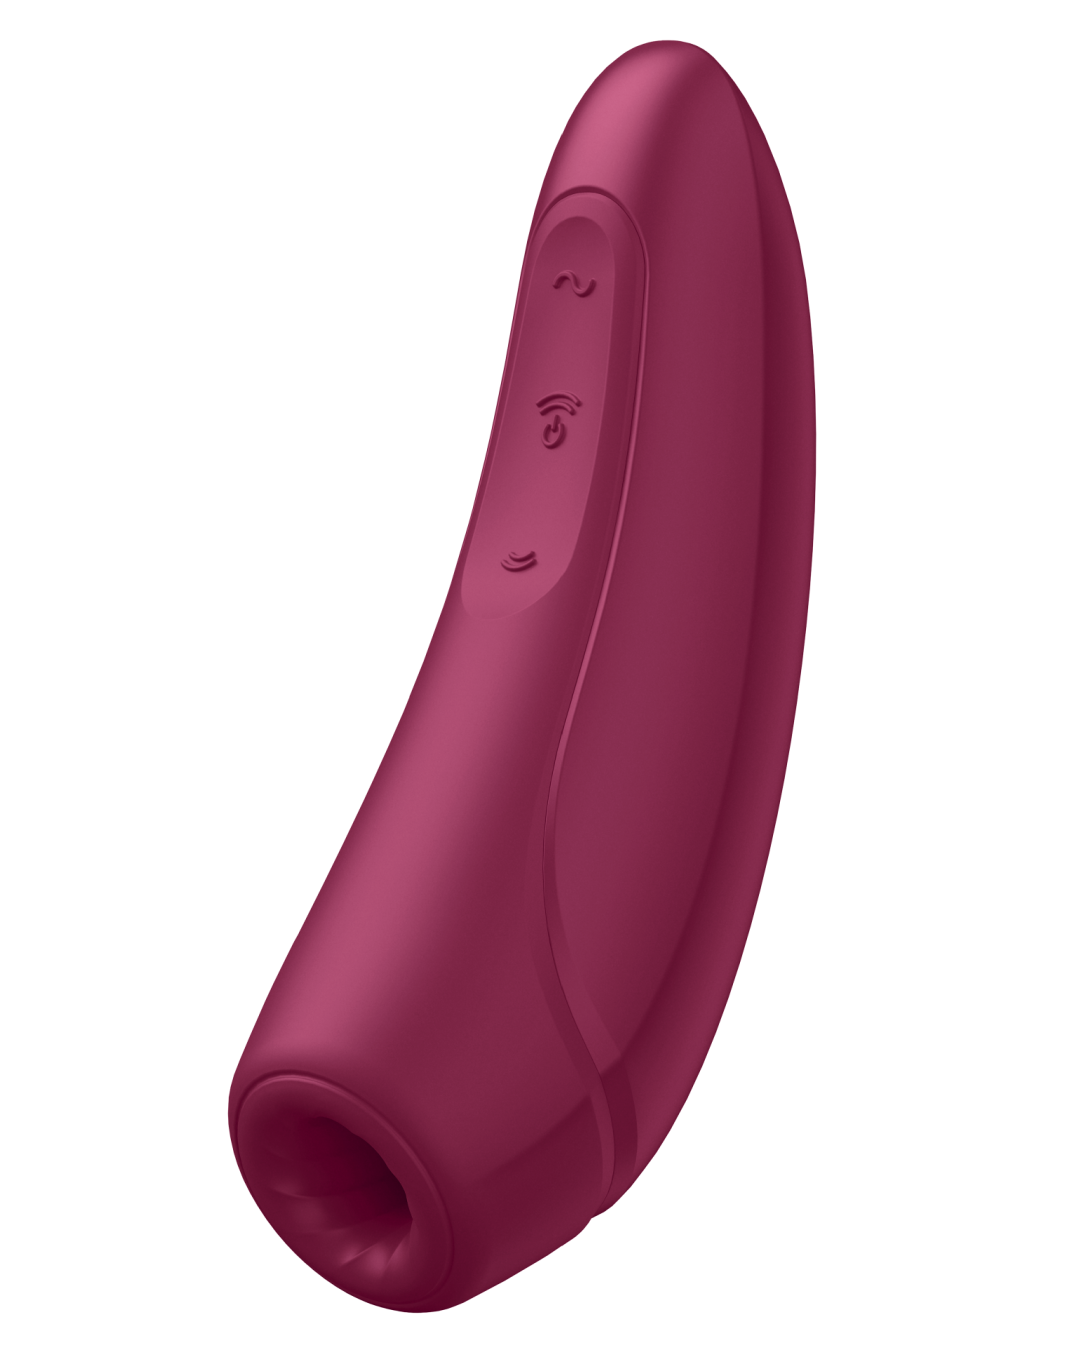 Satisfyer Curvy 1+ Pressure Wave + Vibration Stimulator - Dark Red against a white background side view showing the control buttons